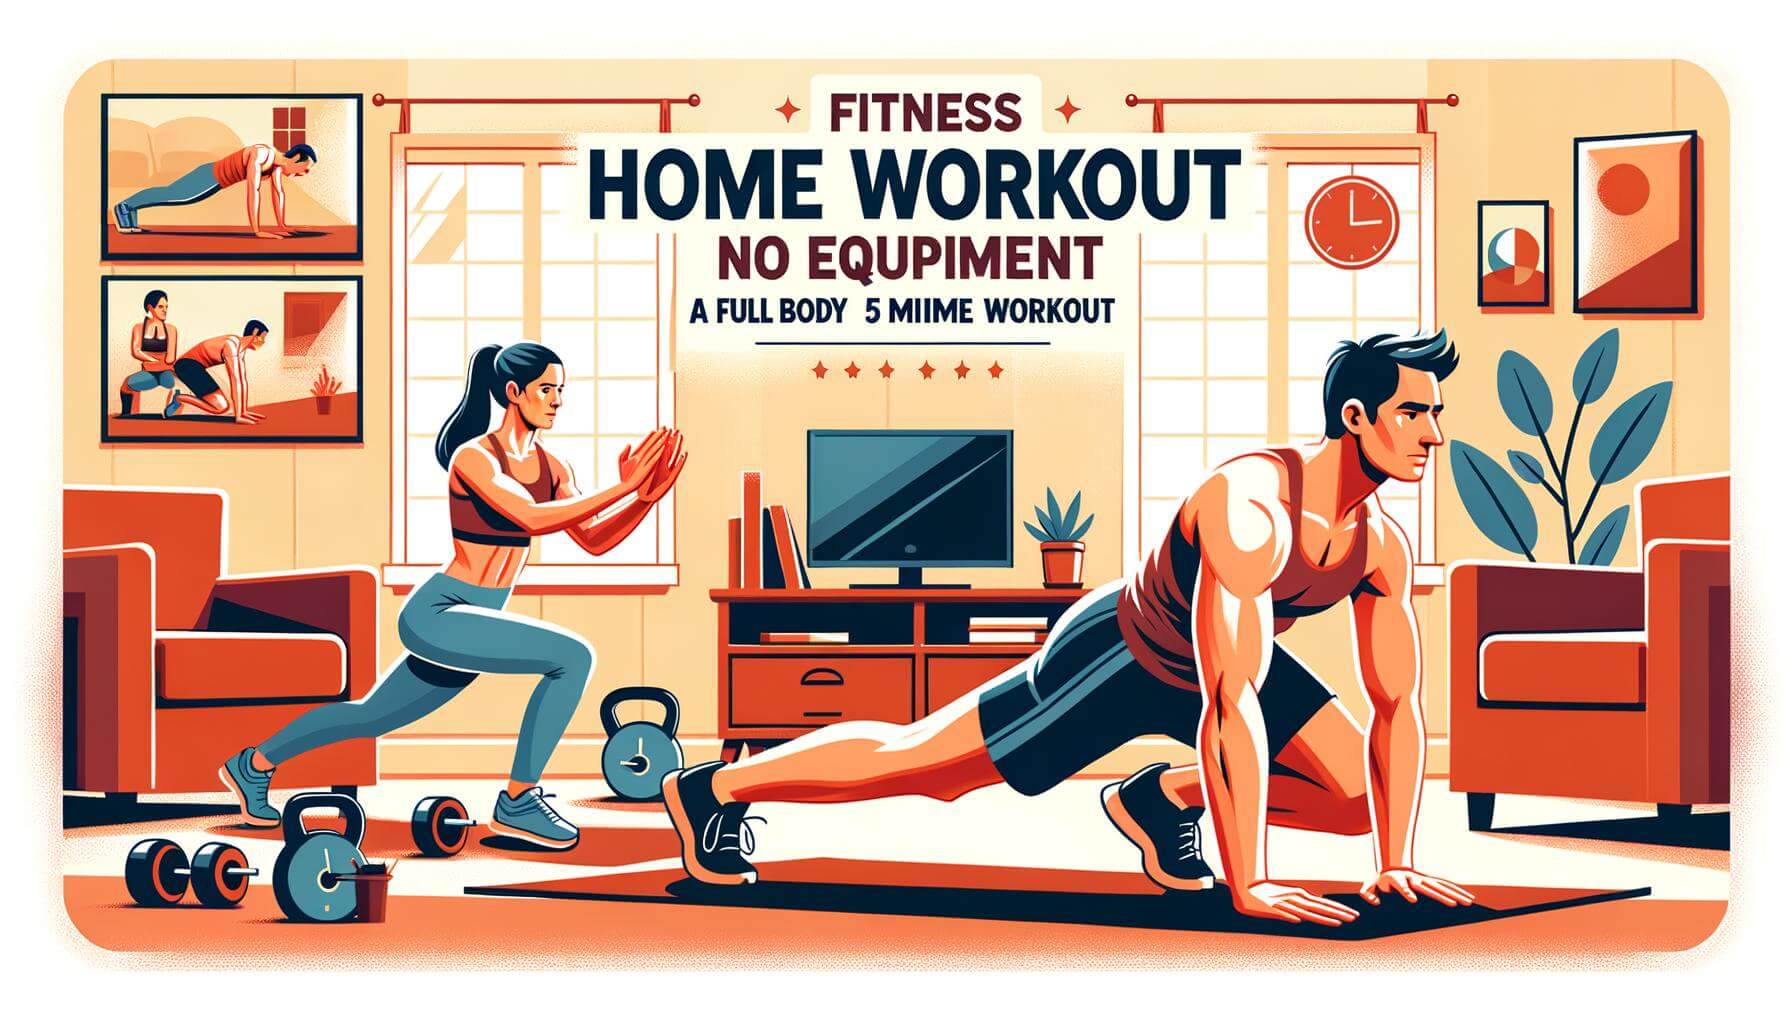 How to incorporate HIIT into your routine